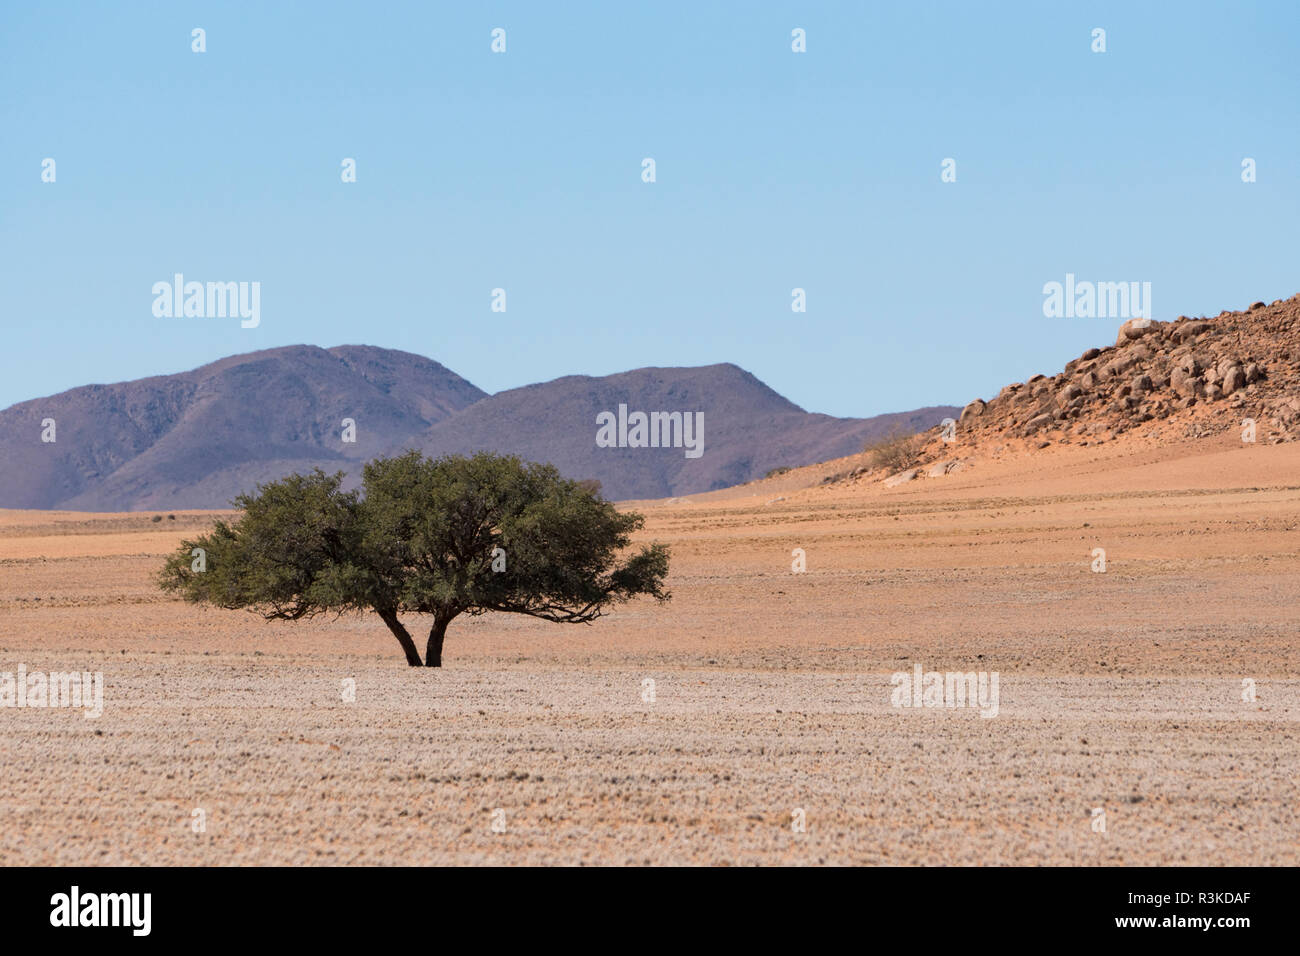 Namibia. A long acacia tree grows in the arid plains of central Namibia. Stock Photo